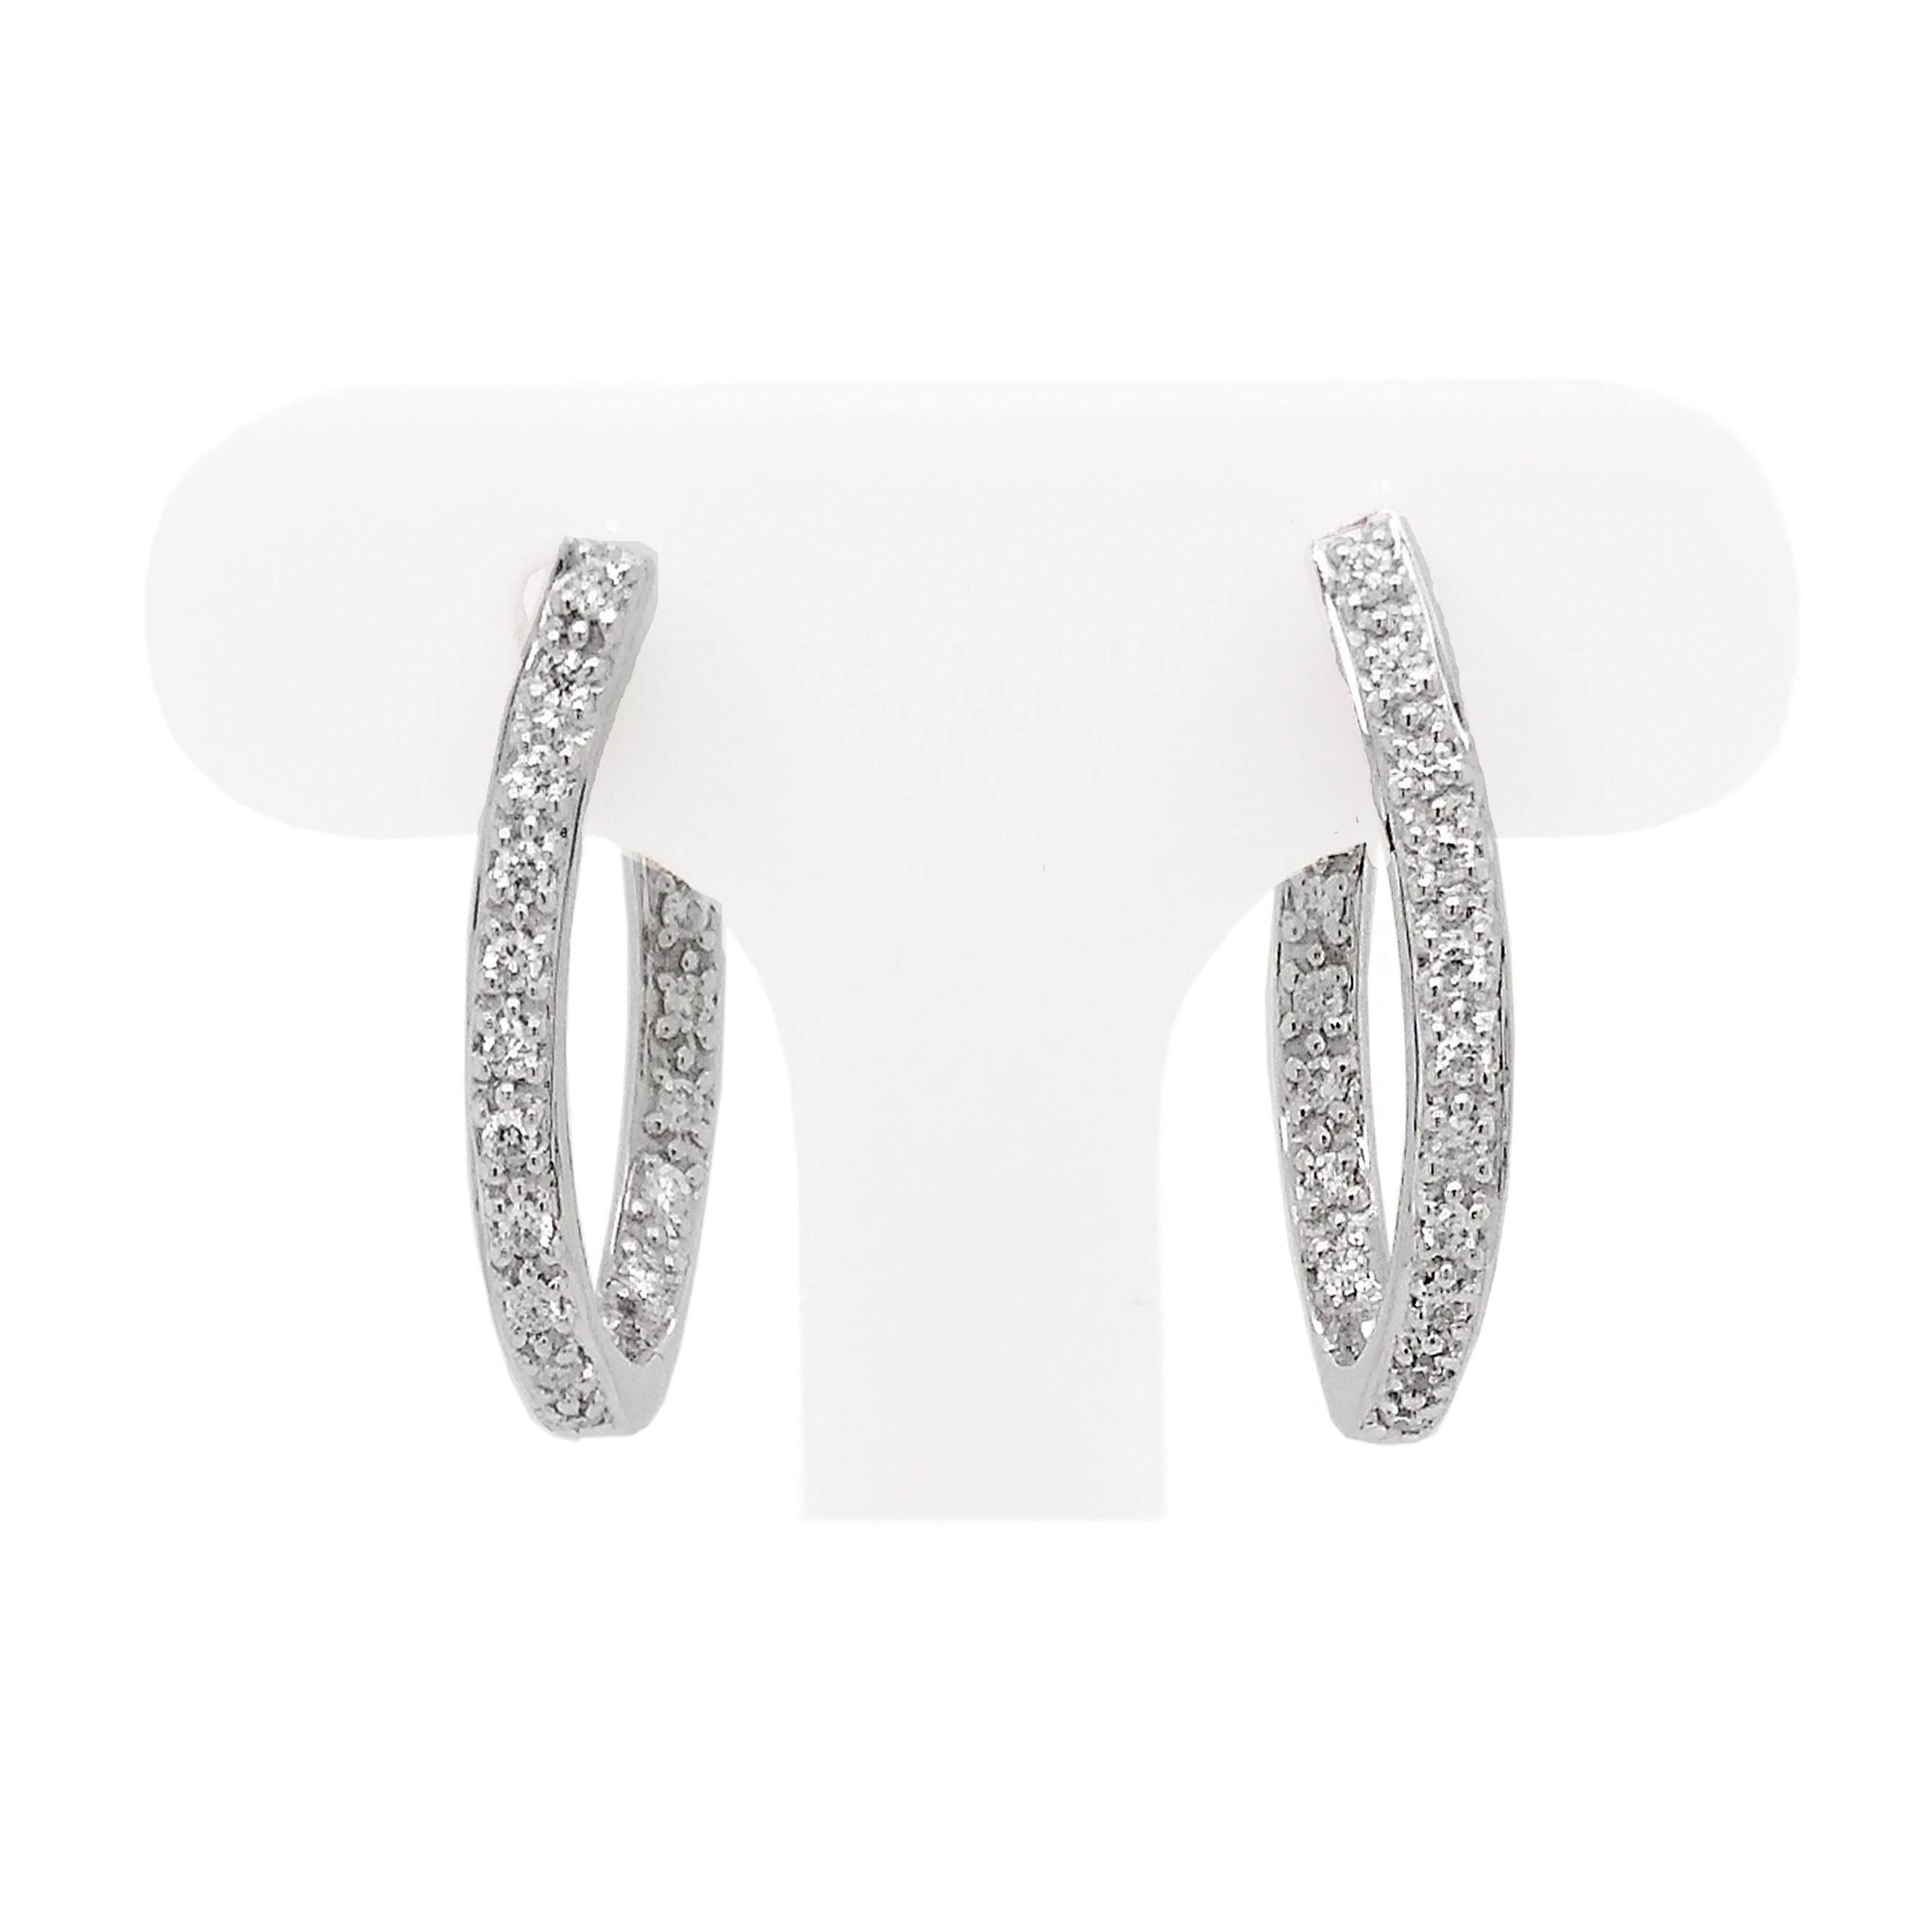 18ct White Gold Pave Diamond Shaped Hoop Earrings